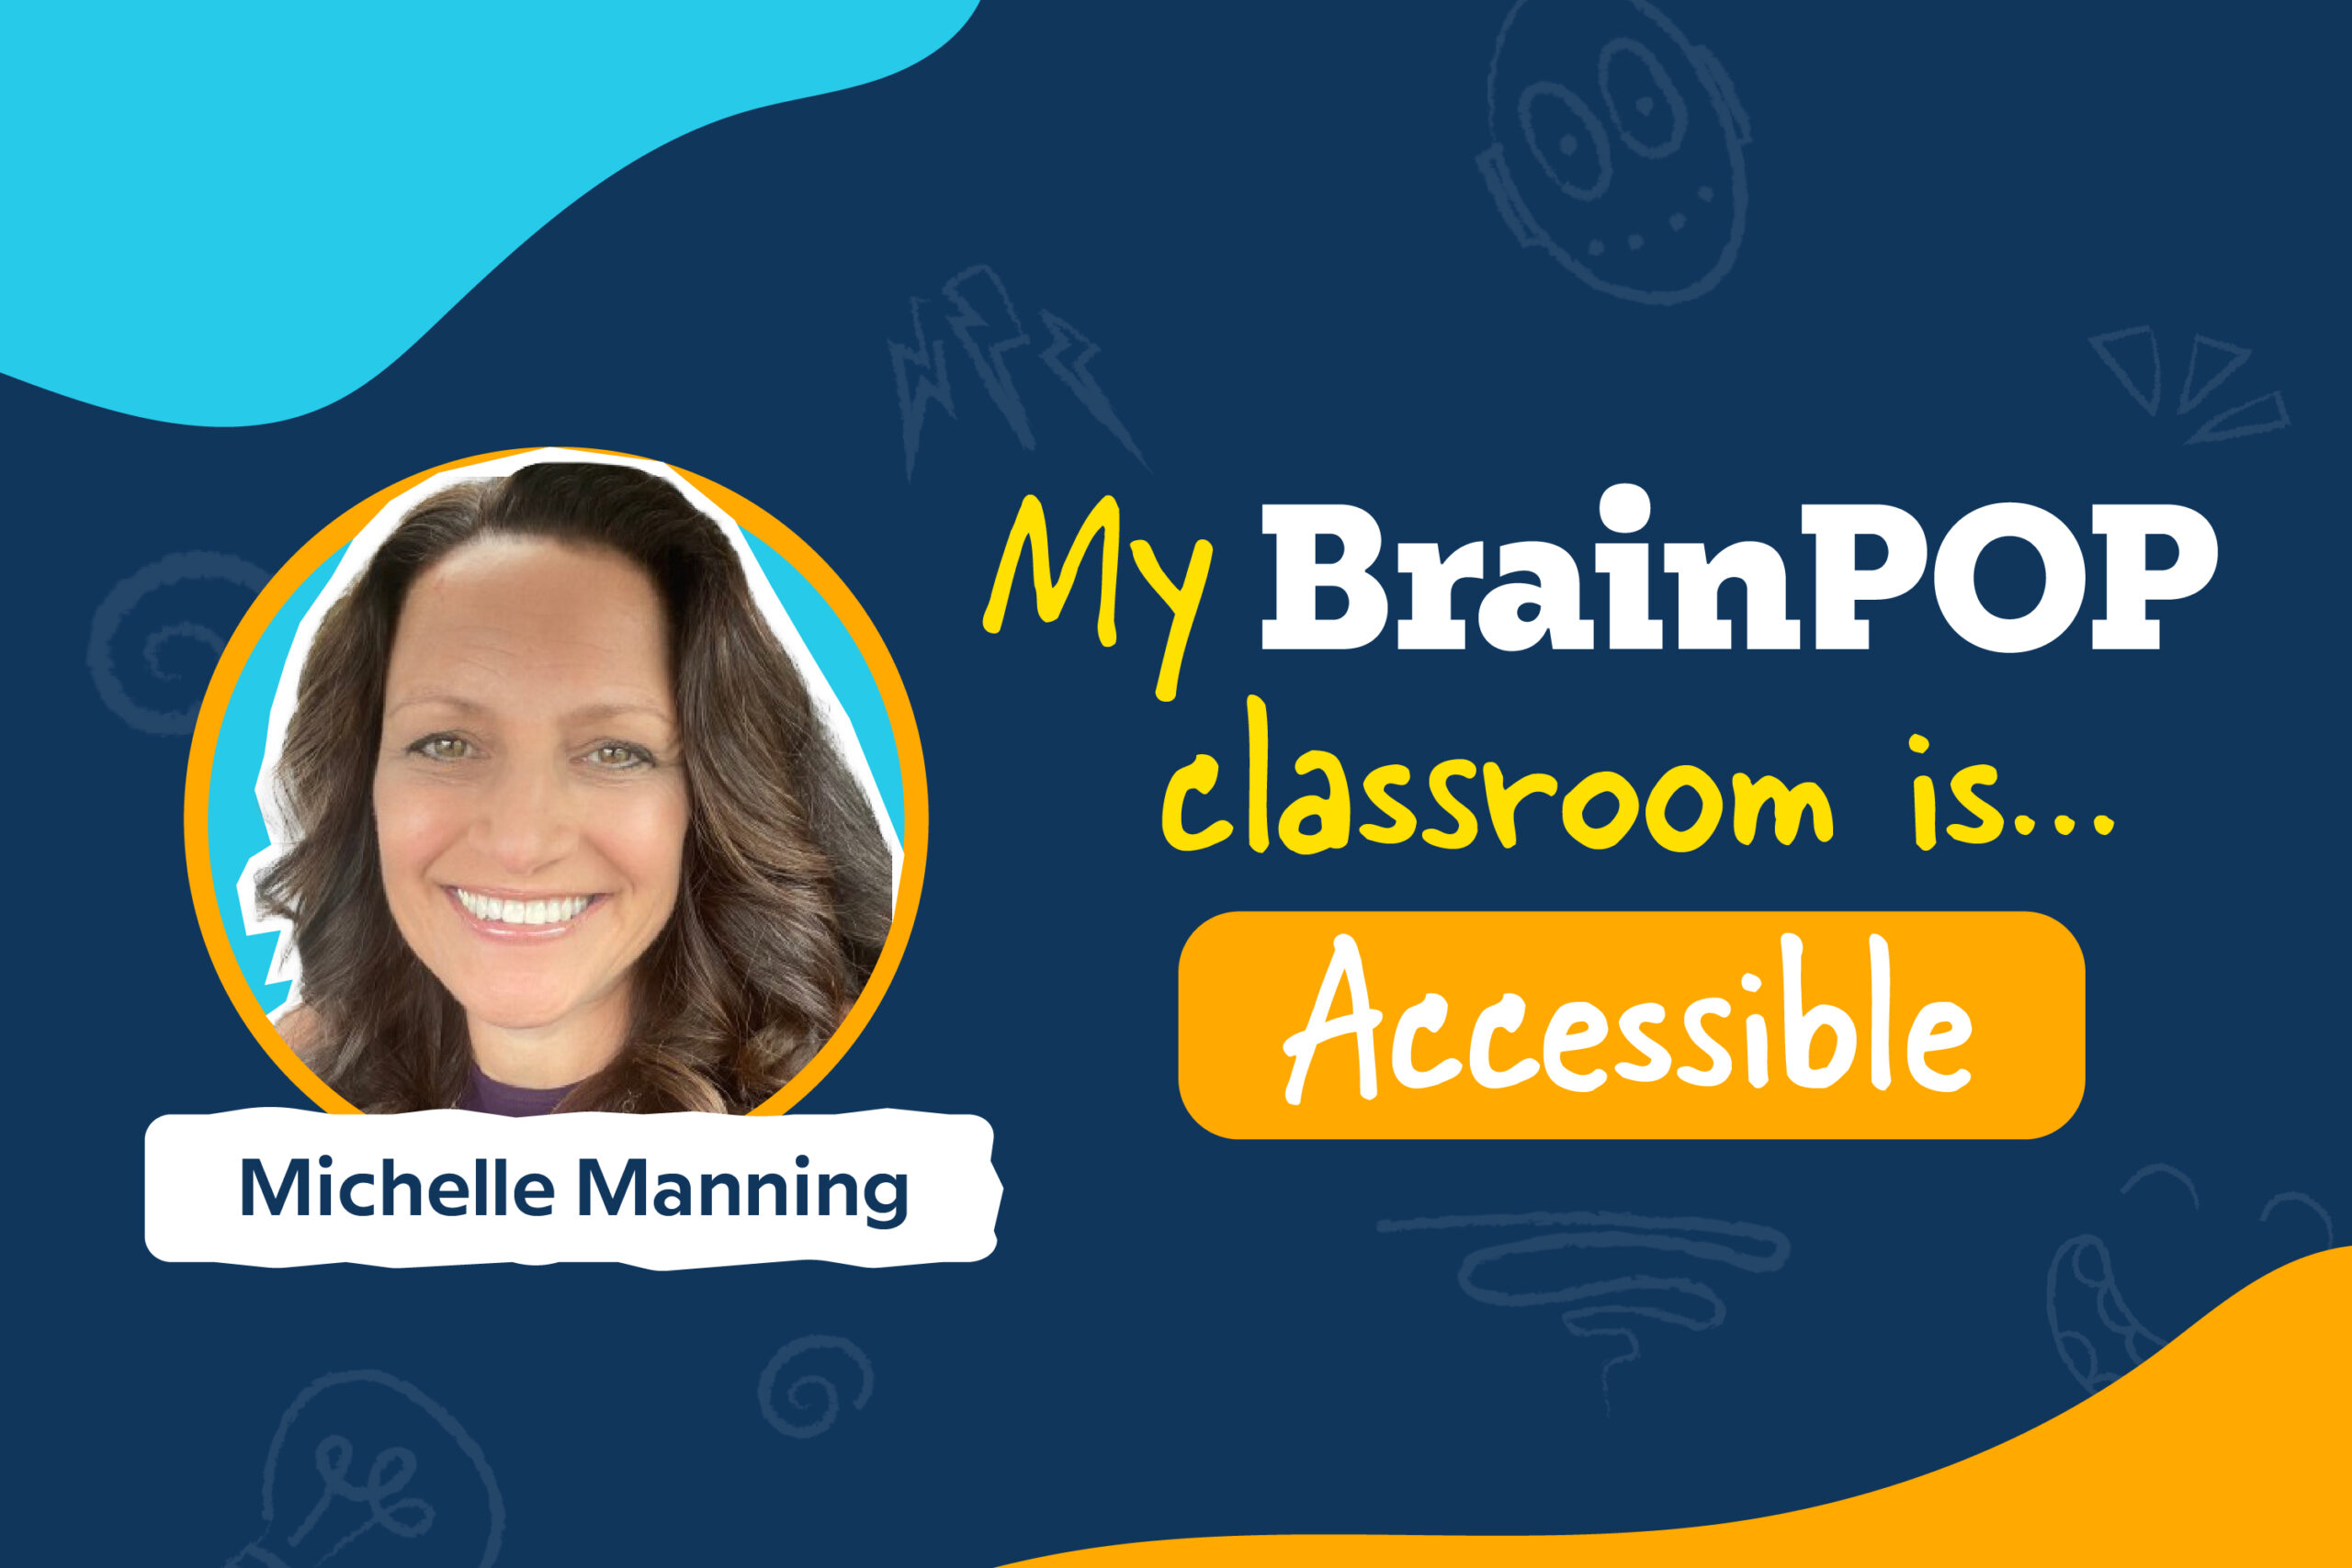 Michelle Manning headshot and text that reads "My BrainPOP Classroom is Accessible"